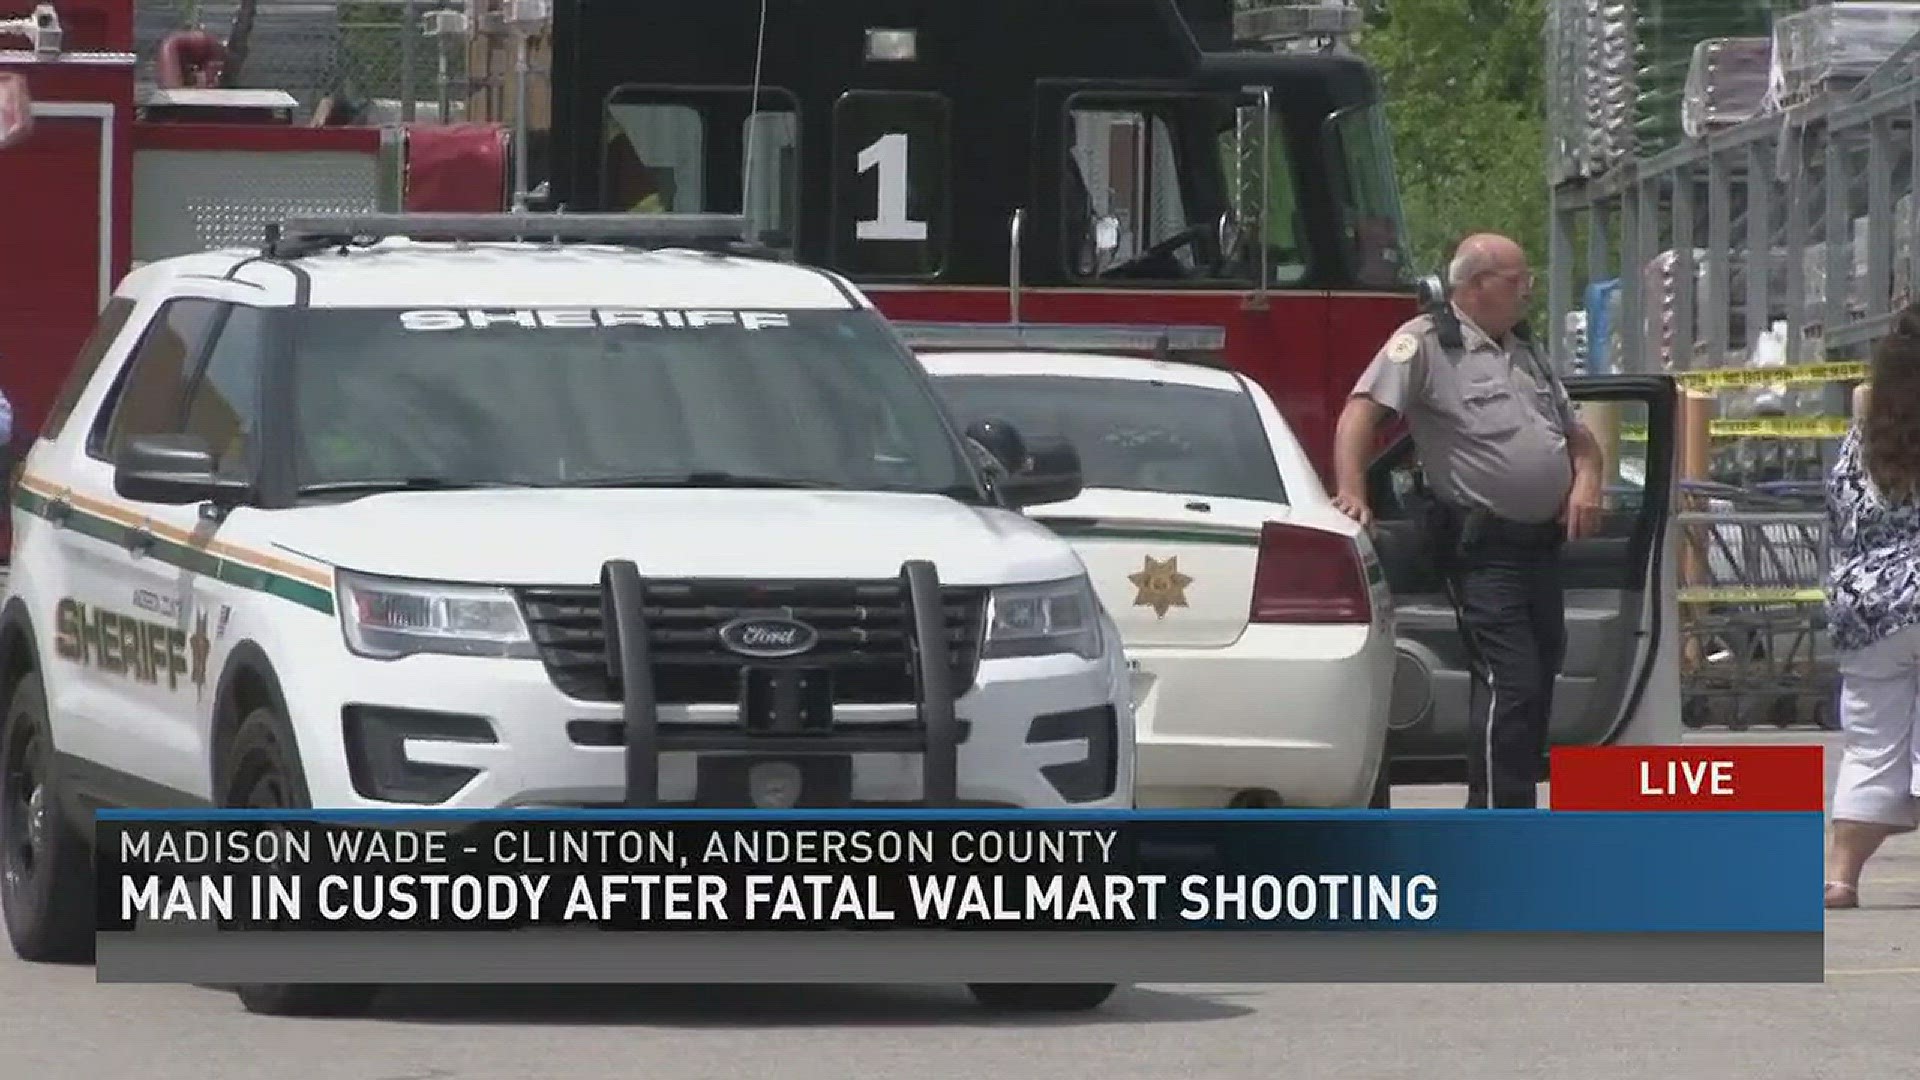 Police have confirmed one person is dead after a shooting at a Walmart in Clinton, Tennessee. (4/28/17 4 p.m.)